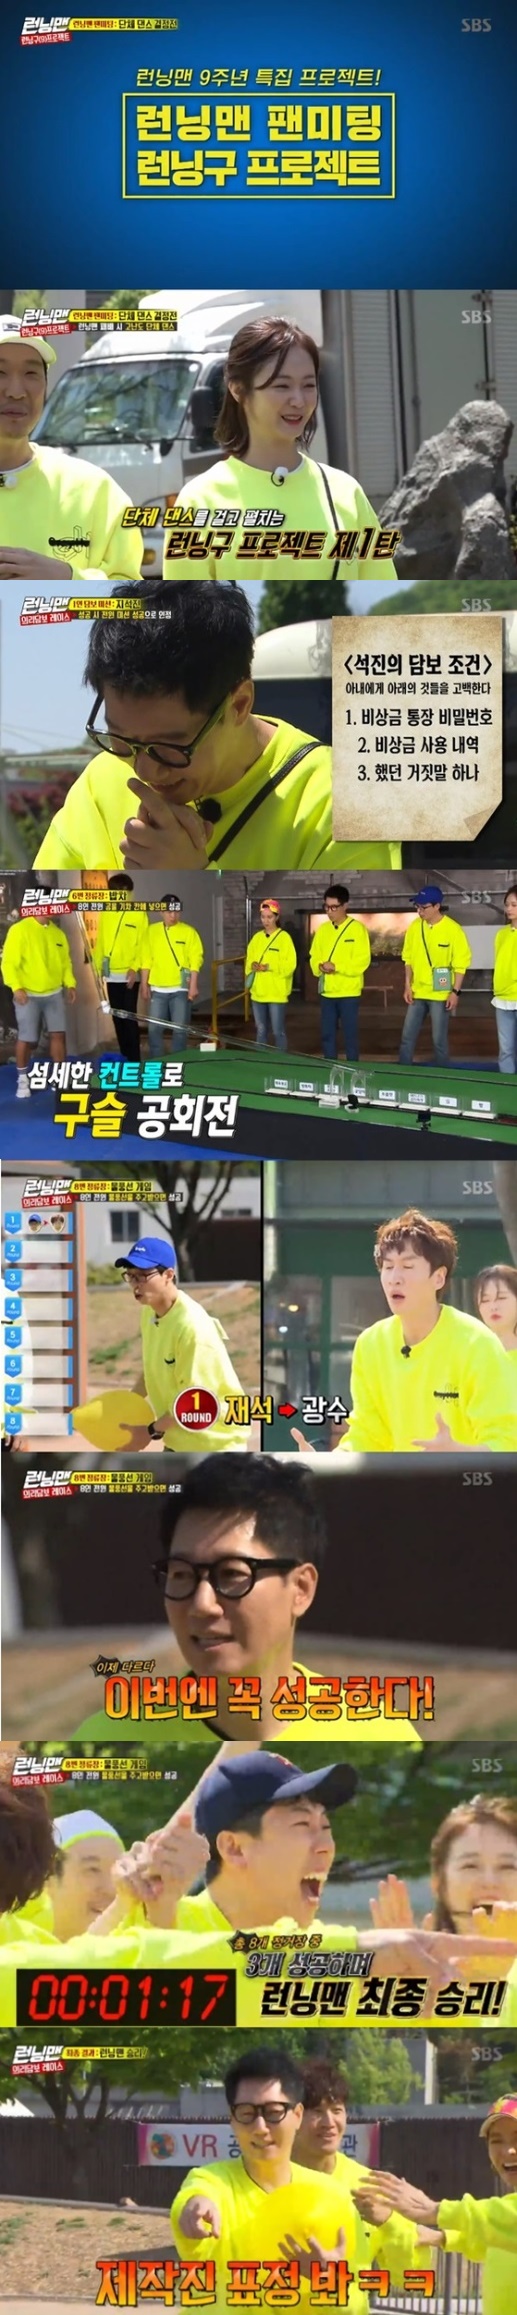 <p>SBS ‘Running Man’this 9th anniversary special project ‘Running Man Love Without Love (Live at Summer Vacation/08 - Run to the tool project’is the first public and viewership dramatically rose.</p><p>Viewership survey Agency Nielsen Korea, according to the 19 broadcast of ‘Running Man’is the main advertising officials of the important indicators of ‘2049 target audience viewership’in the last week than Formula rises 5. 1%(Seoul Capital Area household viewership Part 2 standard). Average viewership too, the upswing represents part 1 of 5. 3%, Part 2 8. 4%(the Seoul Capital Area household viewership standard). Per minute the best viewership is 8. 9%climbed.</p><p>The ahead for example and for the ‘Running Man’ 9th anniversary special project ‘Running Man Love Without Love (Live at Summer Vacation/08 – Run to the tool project’first was unveiled. Love Without Love (Live at Summer Vacation/08 CUE sheet configuration rights to two and 4 weeks special race to progress to the creators and members of this day broadcast in the ‘group dance’within the first secret.</p><p>The members of this to start with prepare candidates for dance in addition to I want to dance, but if defeated with a recommendation for a dance should be. This members of the team Curling with a fierce 8-round confrontation began and, after 3 wins in success and victory. This scene is per minute, with a maximum application rate of 8. 9%and the ‘best 1 minute’.</p>